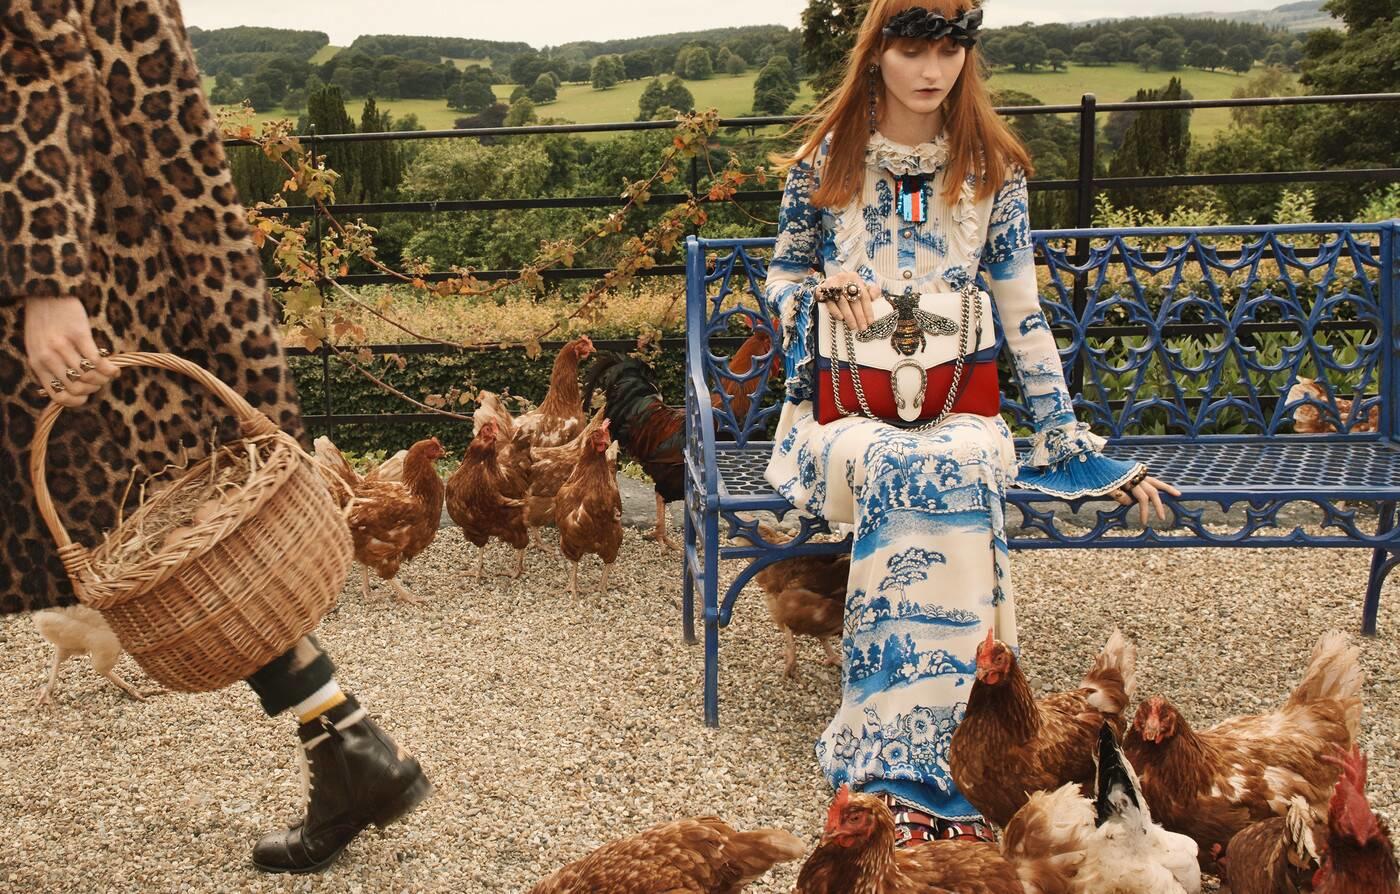 A Gucci advertising campaign photo from Wild Wonderland 2016